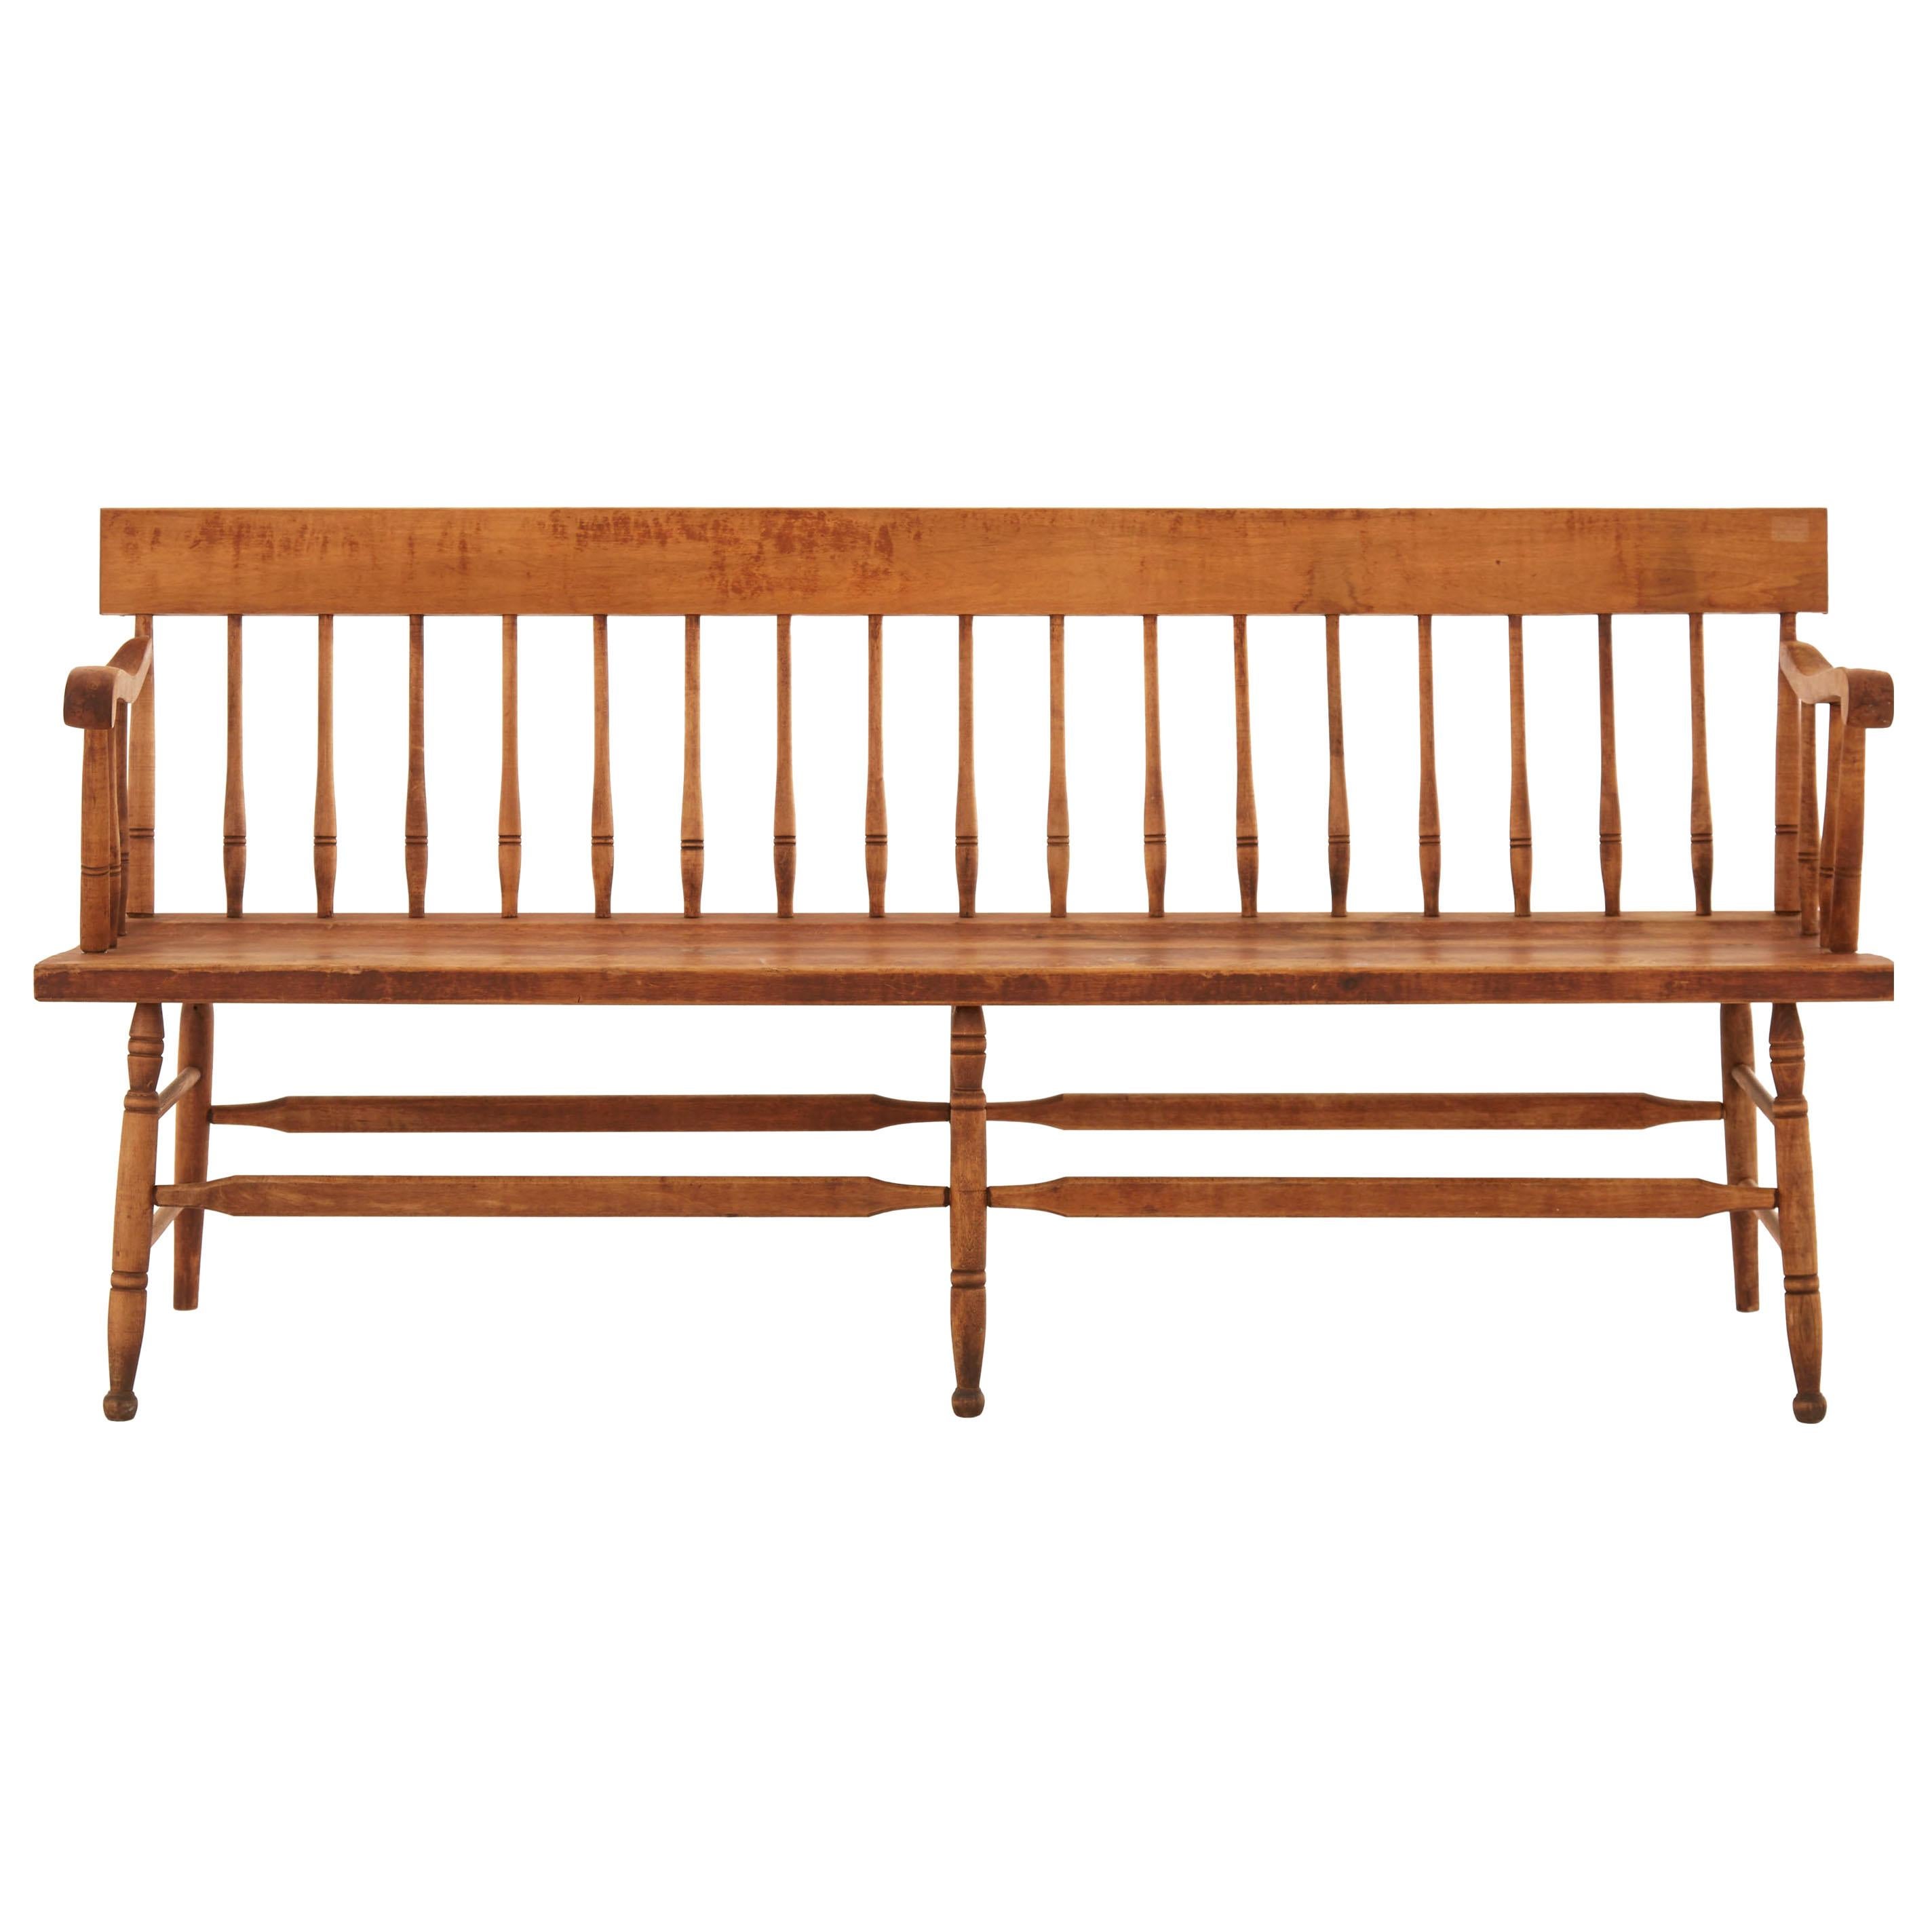 Early 20th Century Wooden Spindle Bench